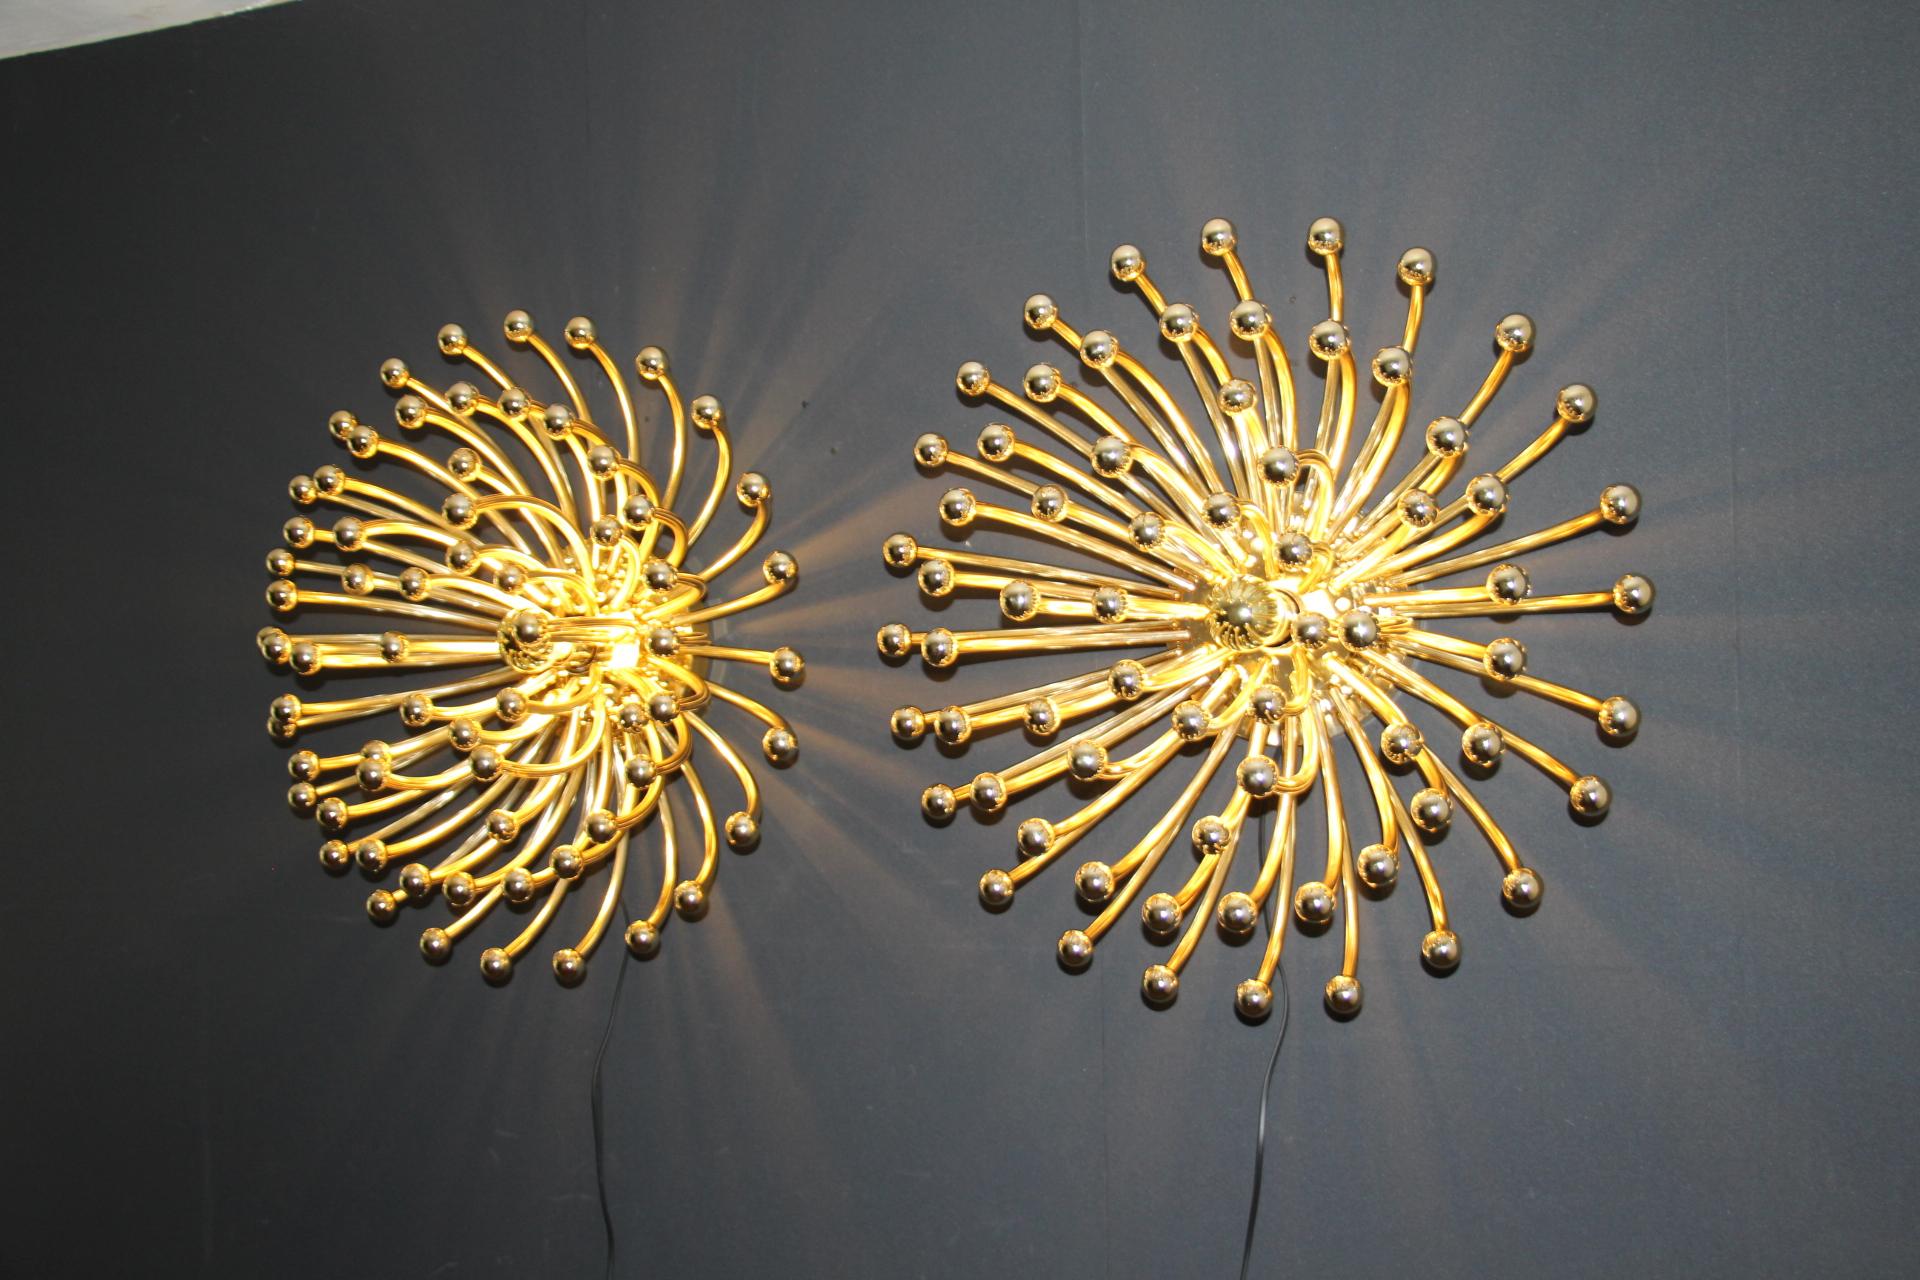  60 cm Gold Pistillo Chandeliers, table lamps or Wall Lamps By Valenti Milano For Sale 7